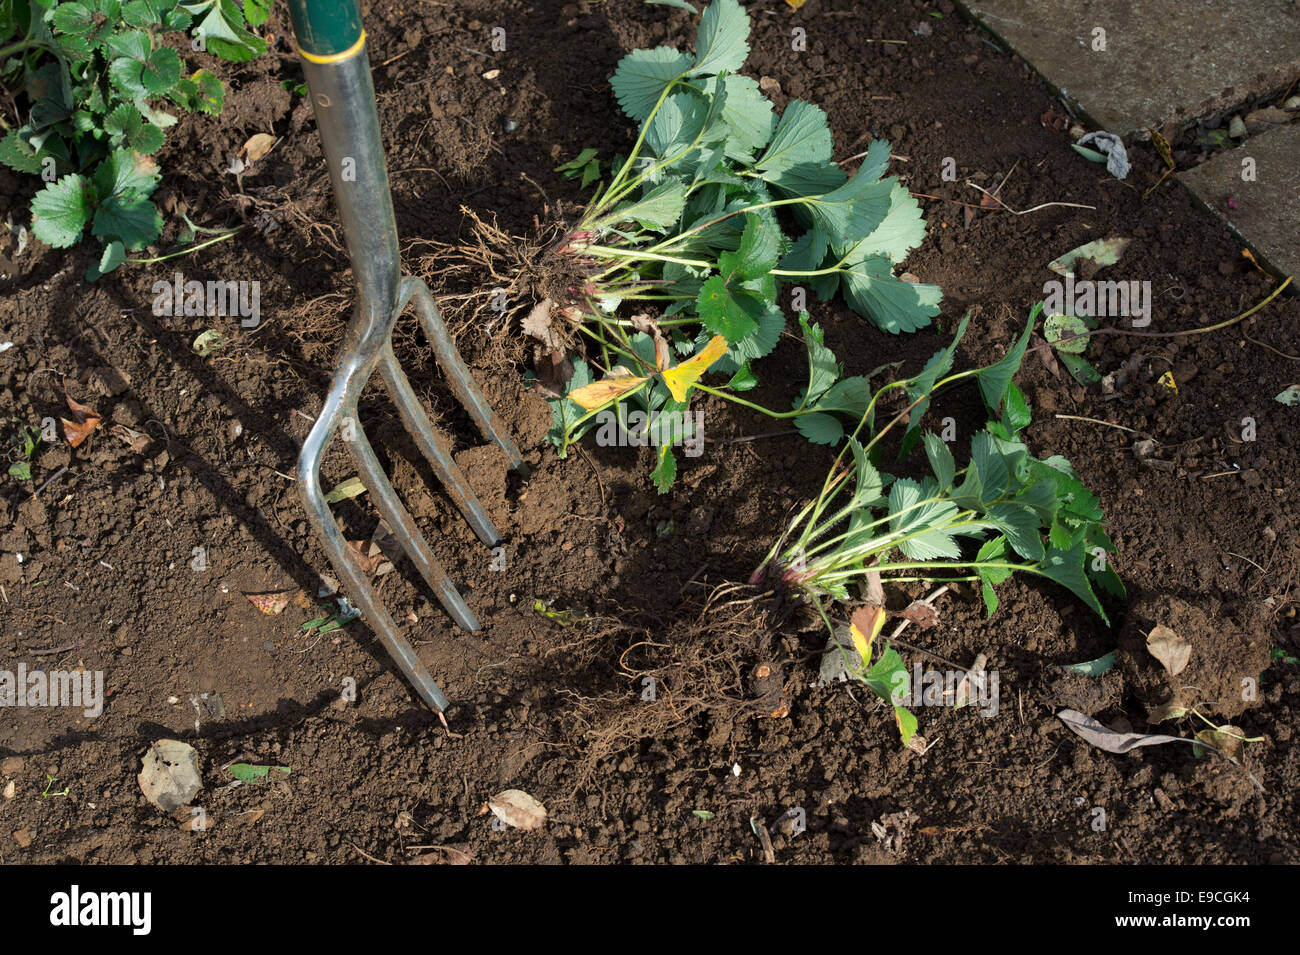 Digging up strawberry plants to replant in an English garden Stock Photo